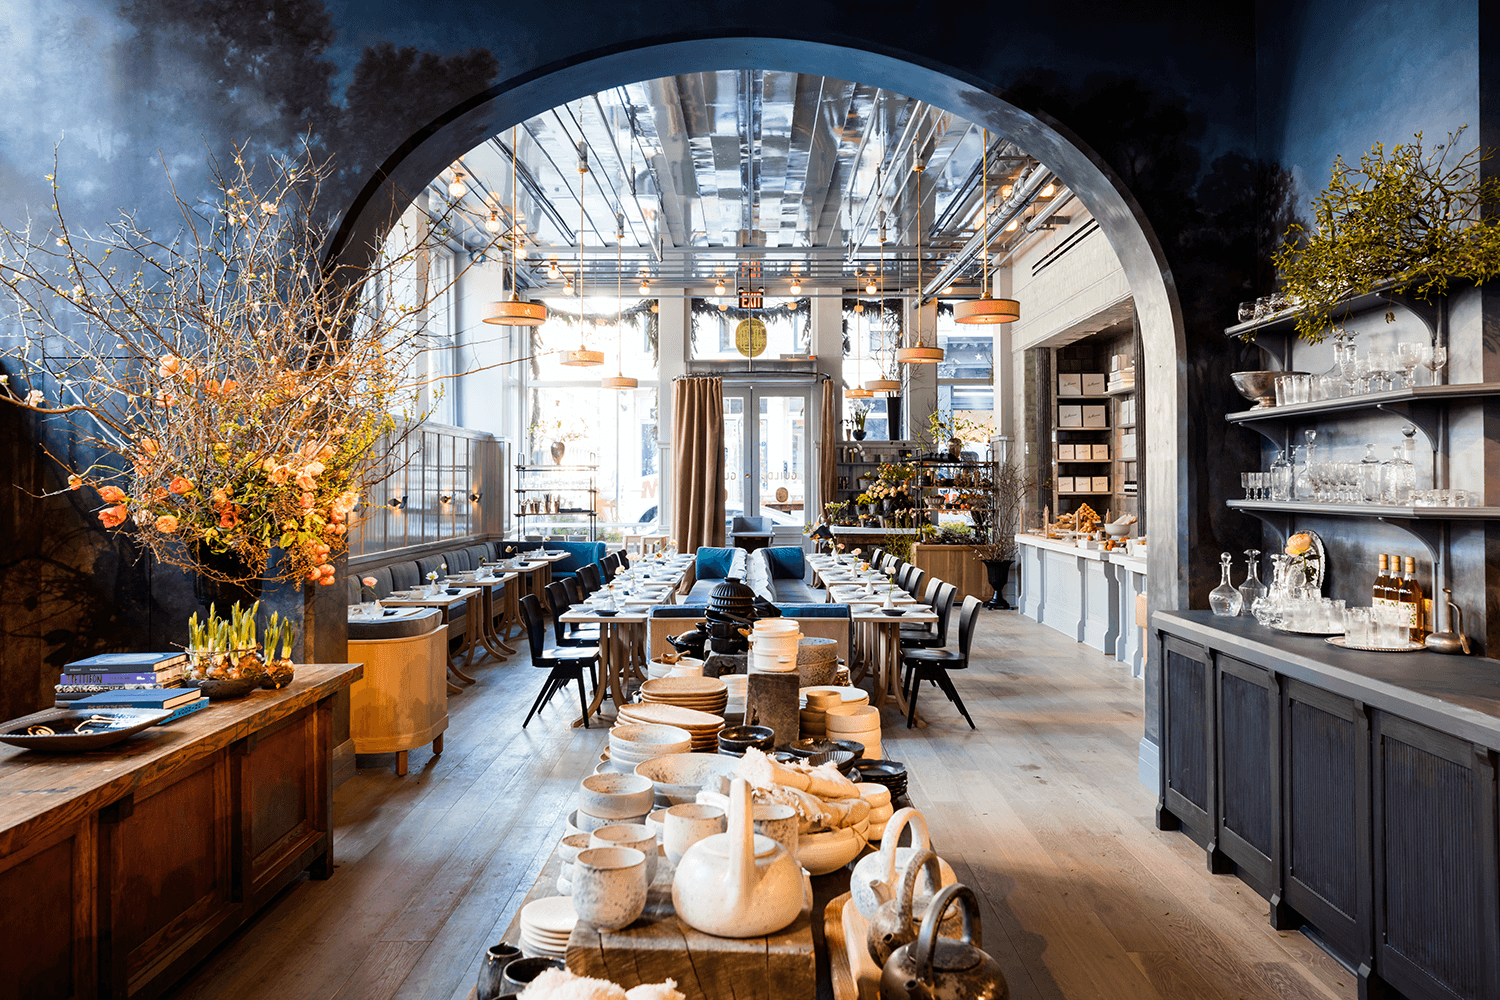 La Mercerie Cafe inside of Roman and Williams Guild in SoHo. NY. Image Credit: Adrian Gaut